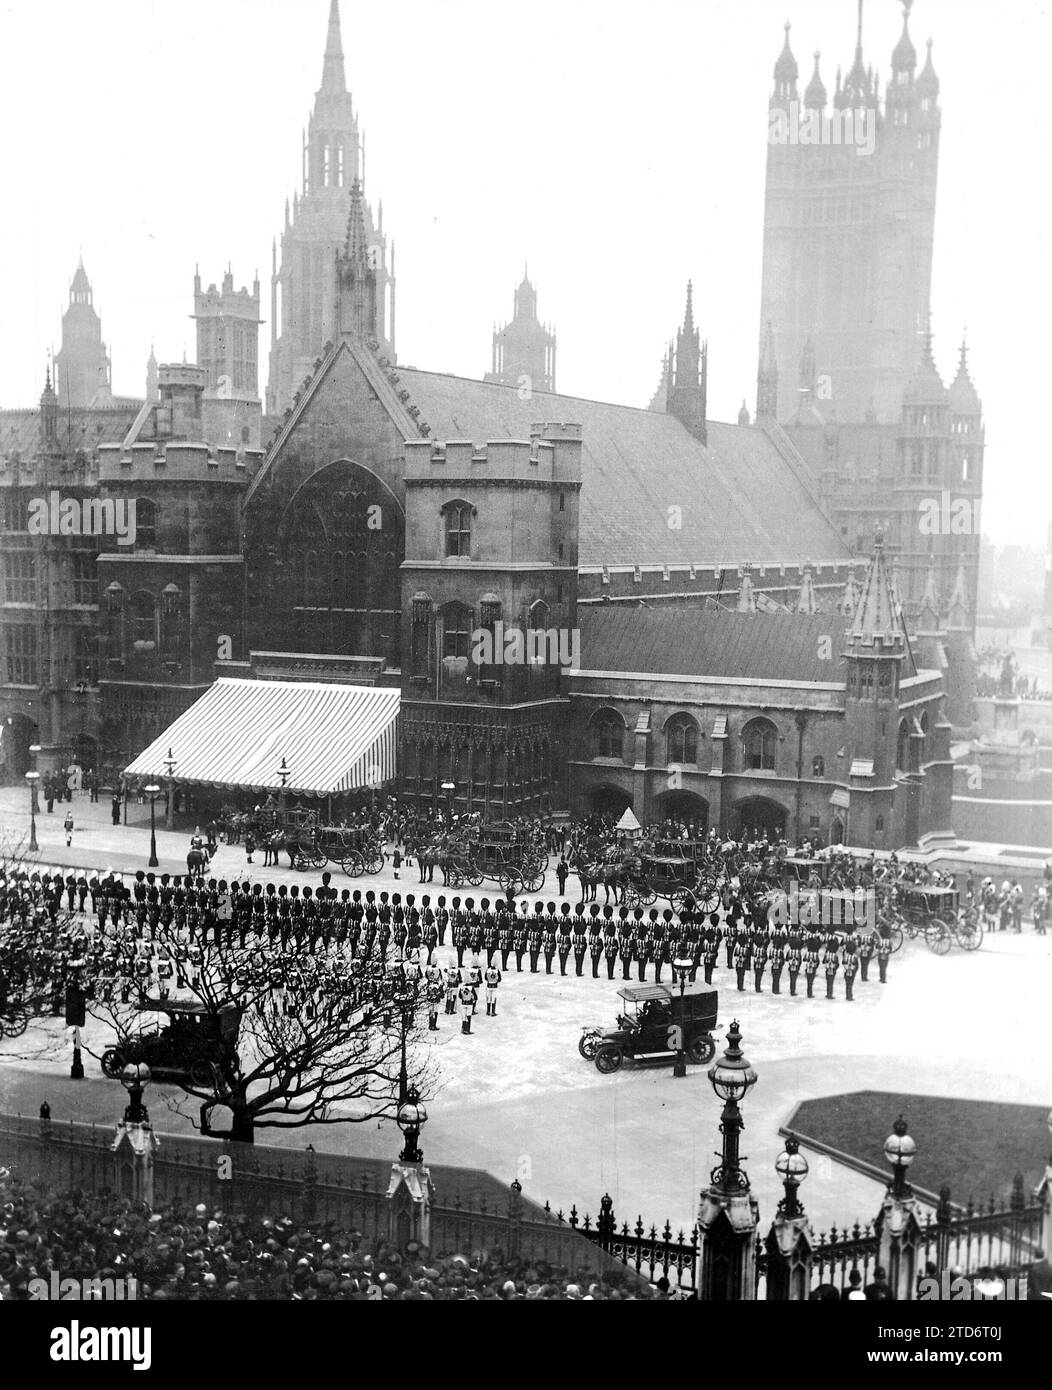 04/30/1910. The Funeral of the King of England in London. Arrival of the funeral procession to Westminster Hall, where the mortal remains of Edward VII were transferred. Credit: Album / Archivo ABC Stock Photo